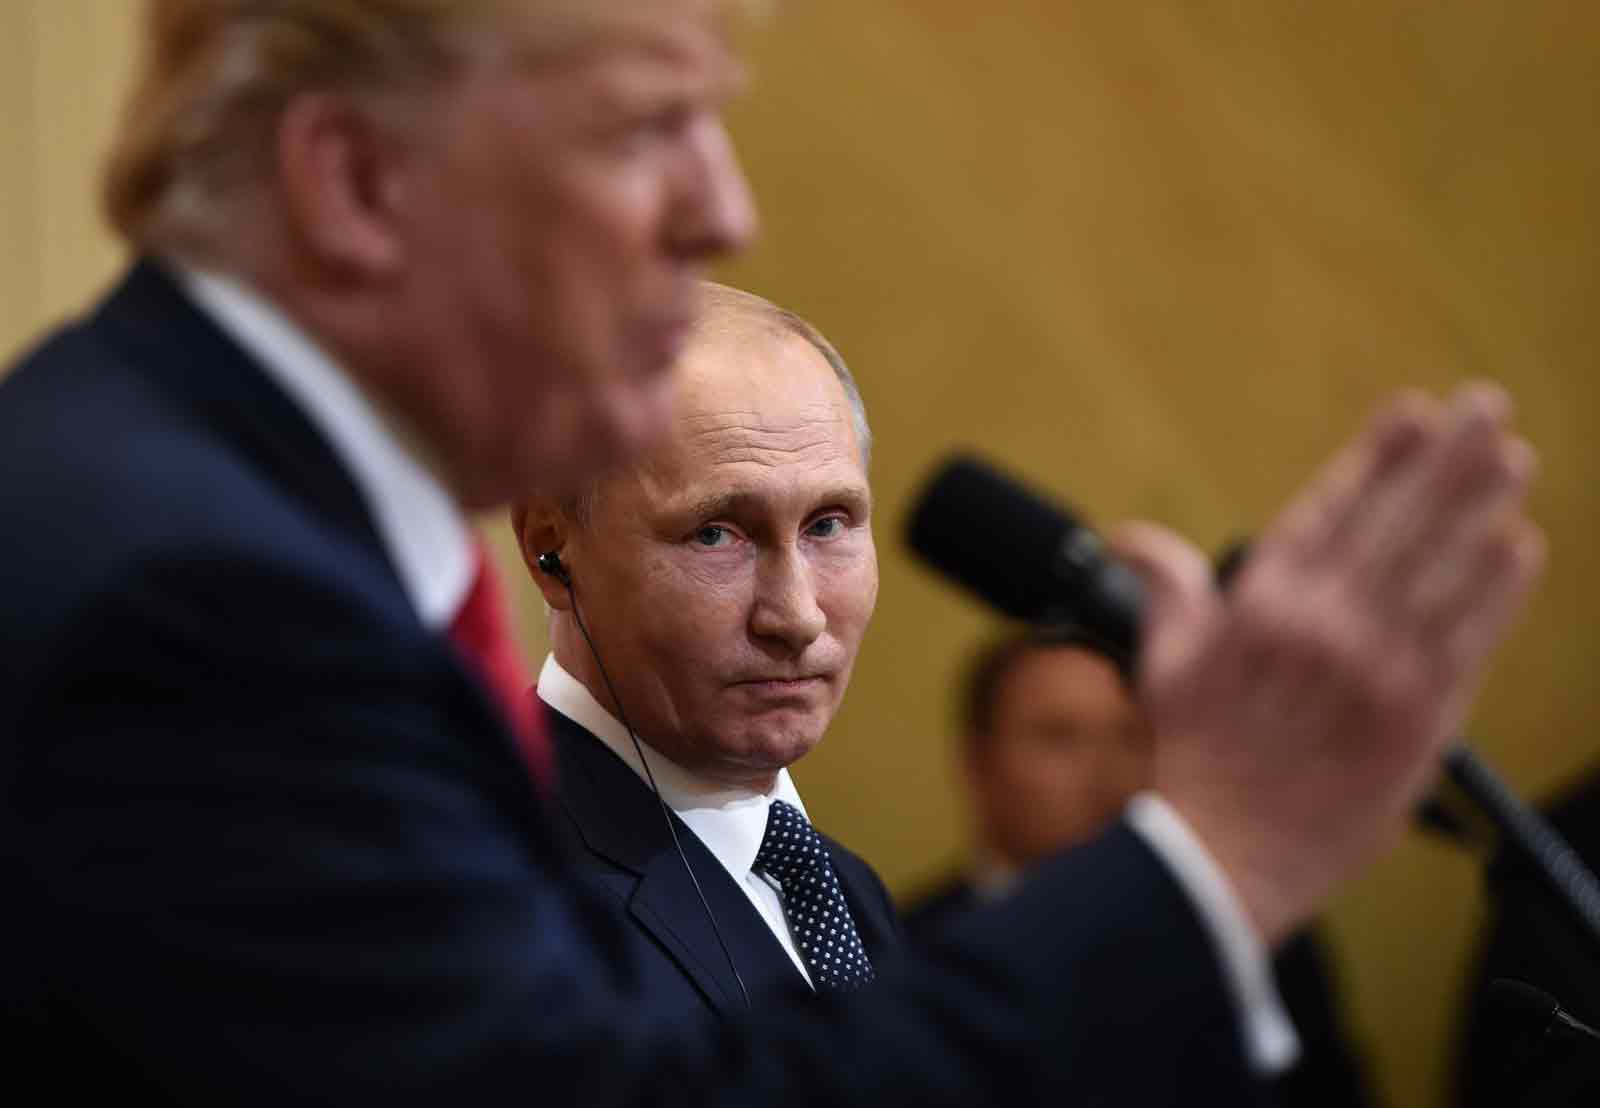 US President Donald Trump and Russian President Vladimir Putin at the Presidential Palace during the Helsinki Summit, Finland, July 16, 2018